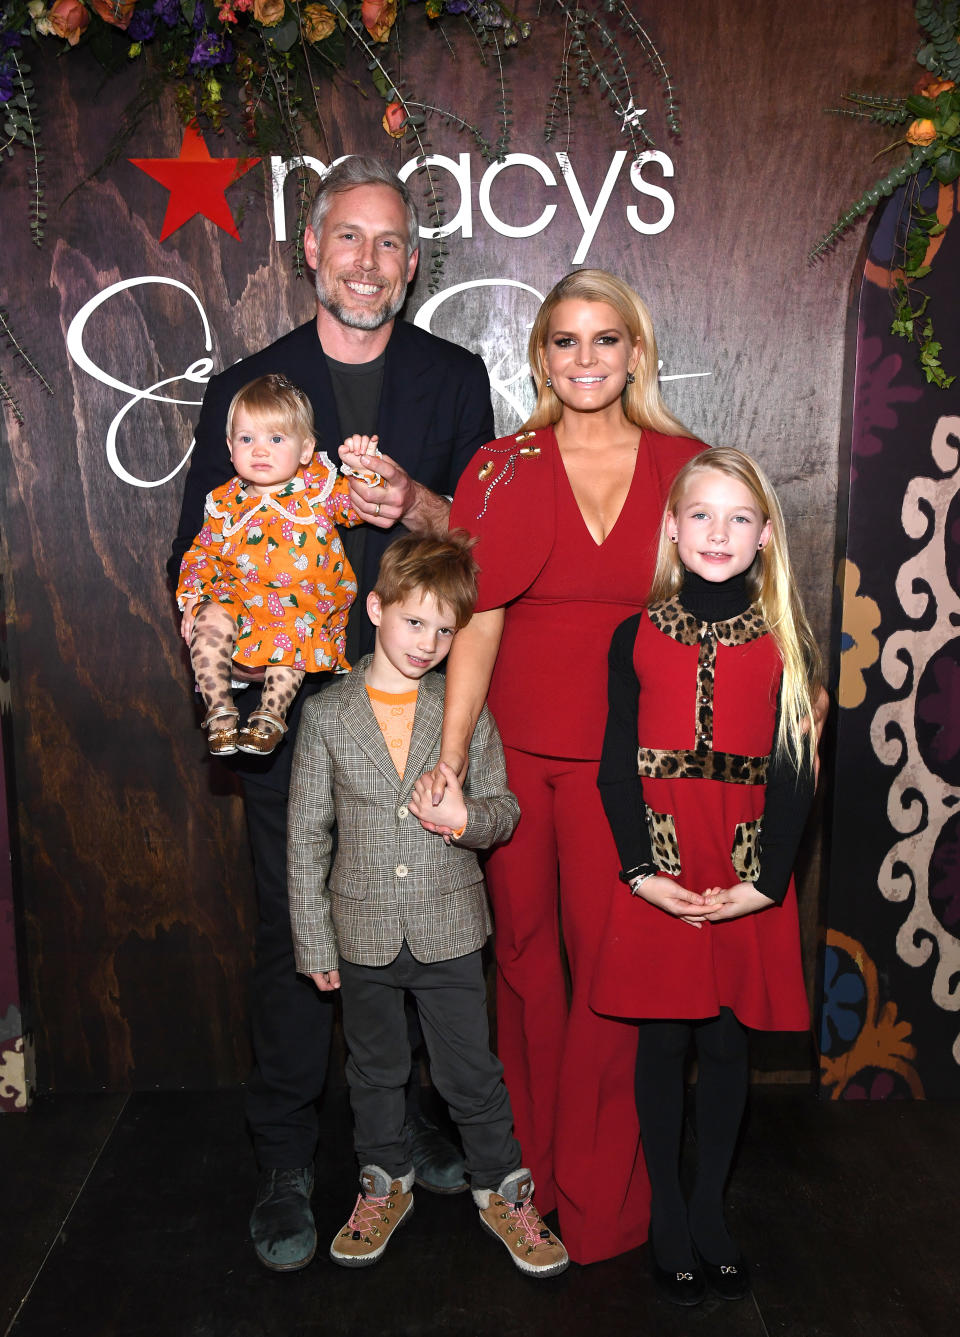 NEW YORK, NEW YORK - FEBRUARY 05: Jessica Simpson poses with Eric Johnson, Birdie Mae Johnson, Ace Knute Johnson and Maxwell Drew Johnson during a celebration of her memoir "Open Book" at  at Macy's Stella 34 Trattoria on February 05, 2020 in New York City. (Photo by Kevin Mazur/Getty Images for Macy's)